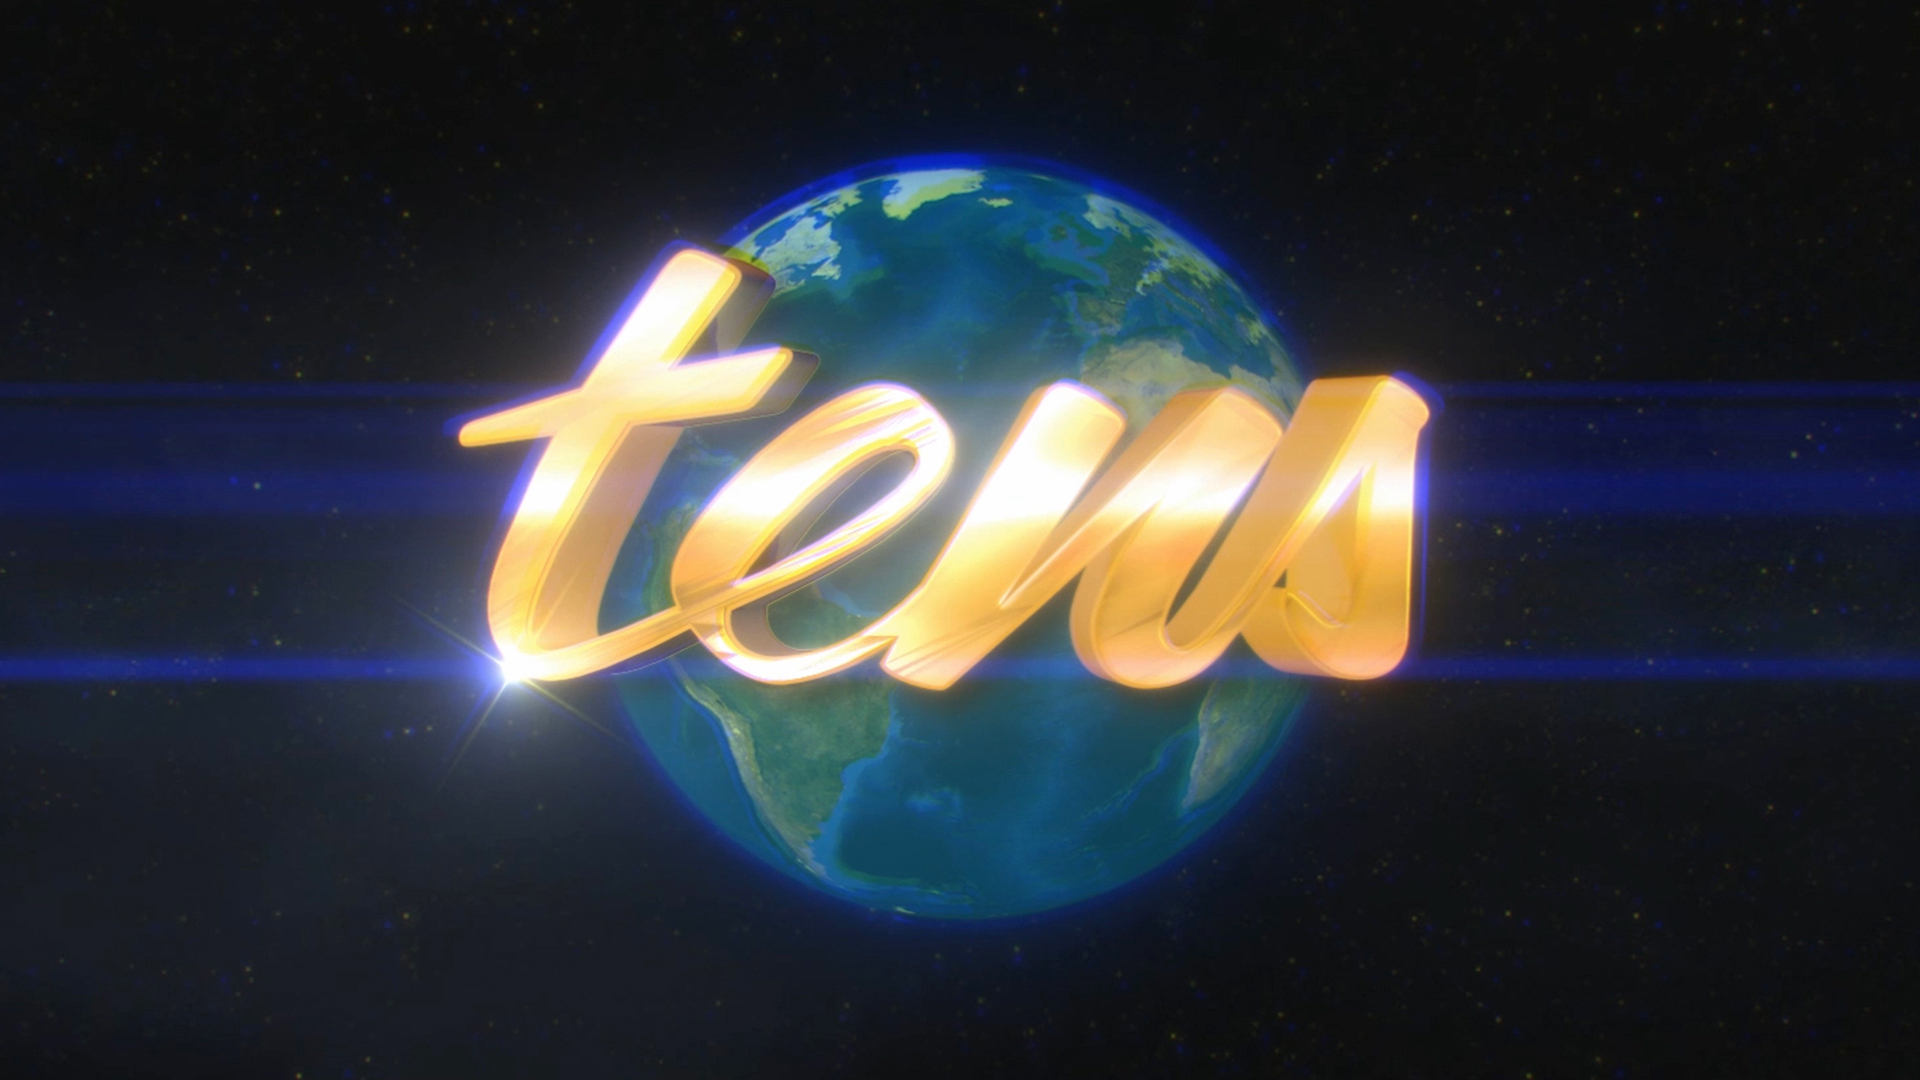 Tens - Youtube commercials ´15